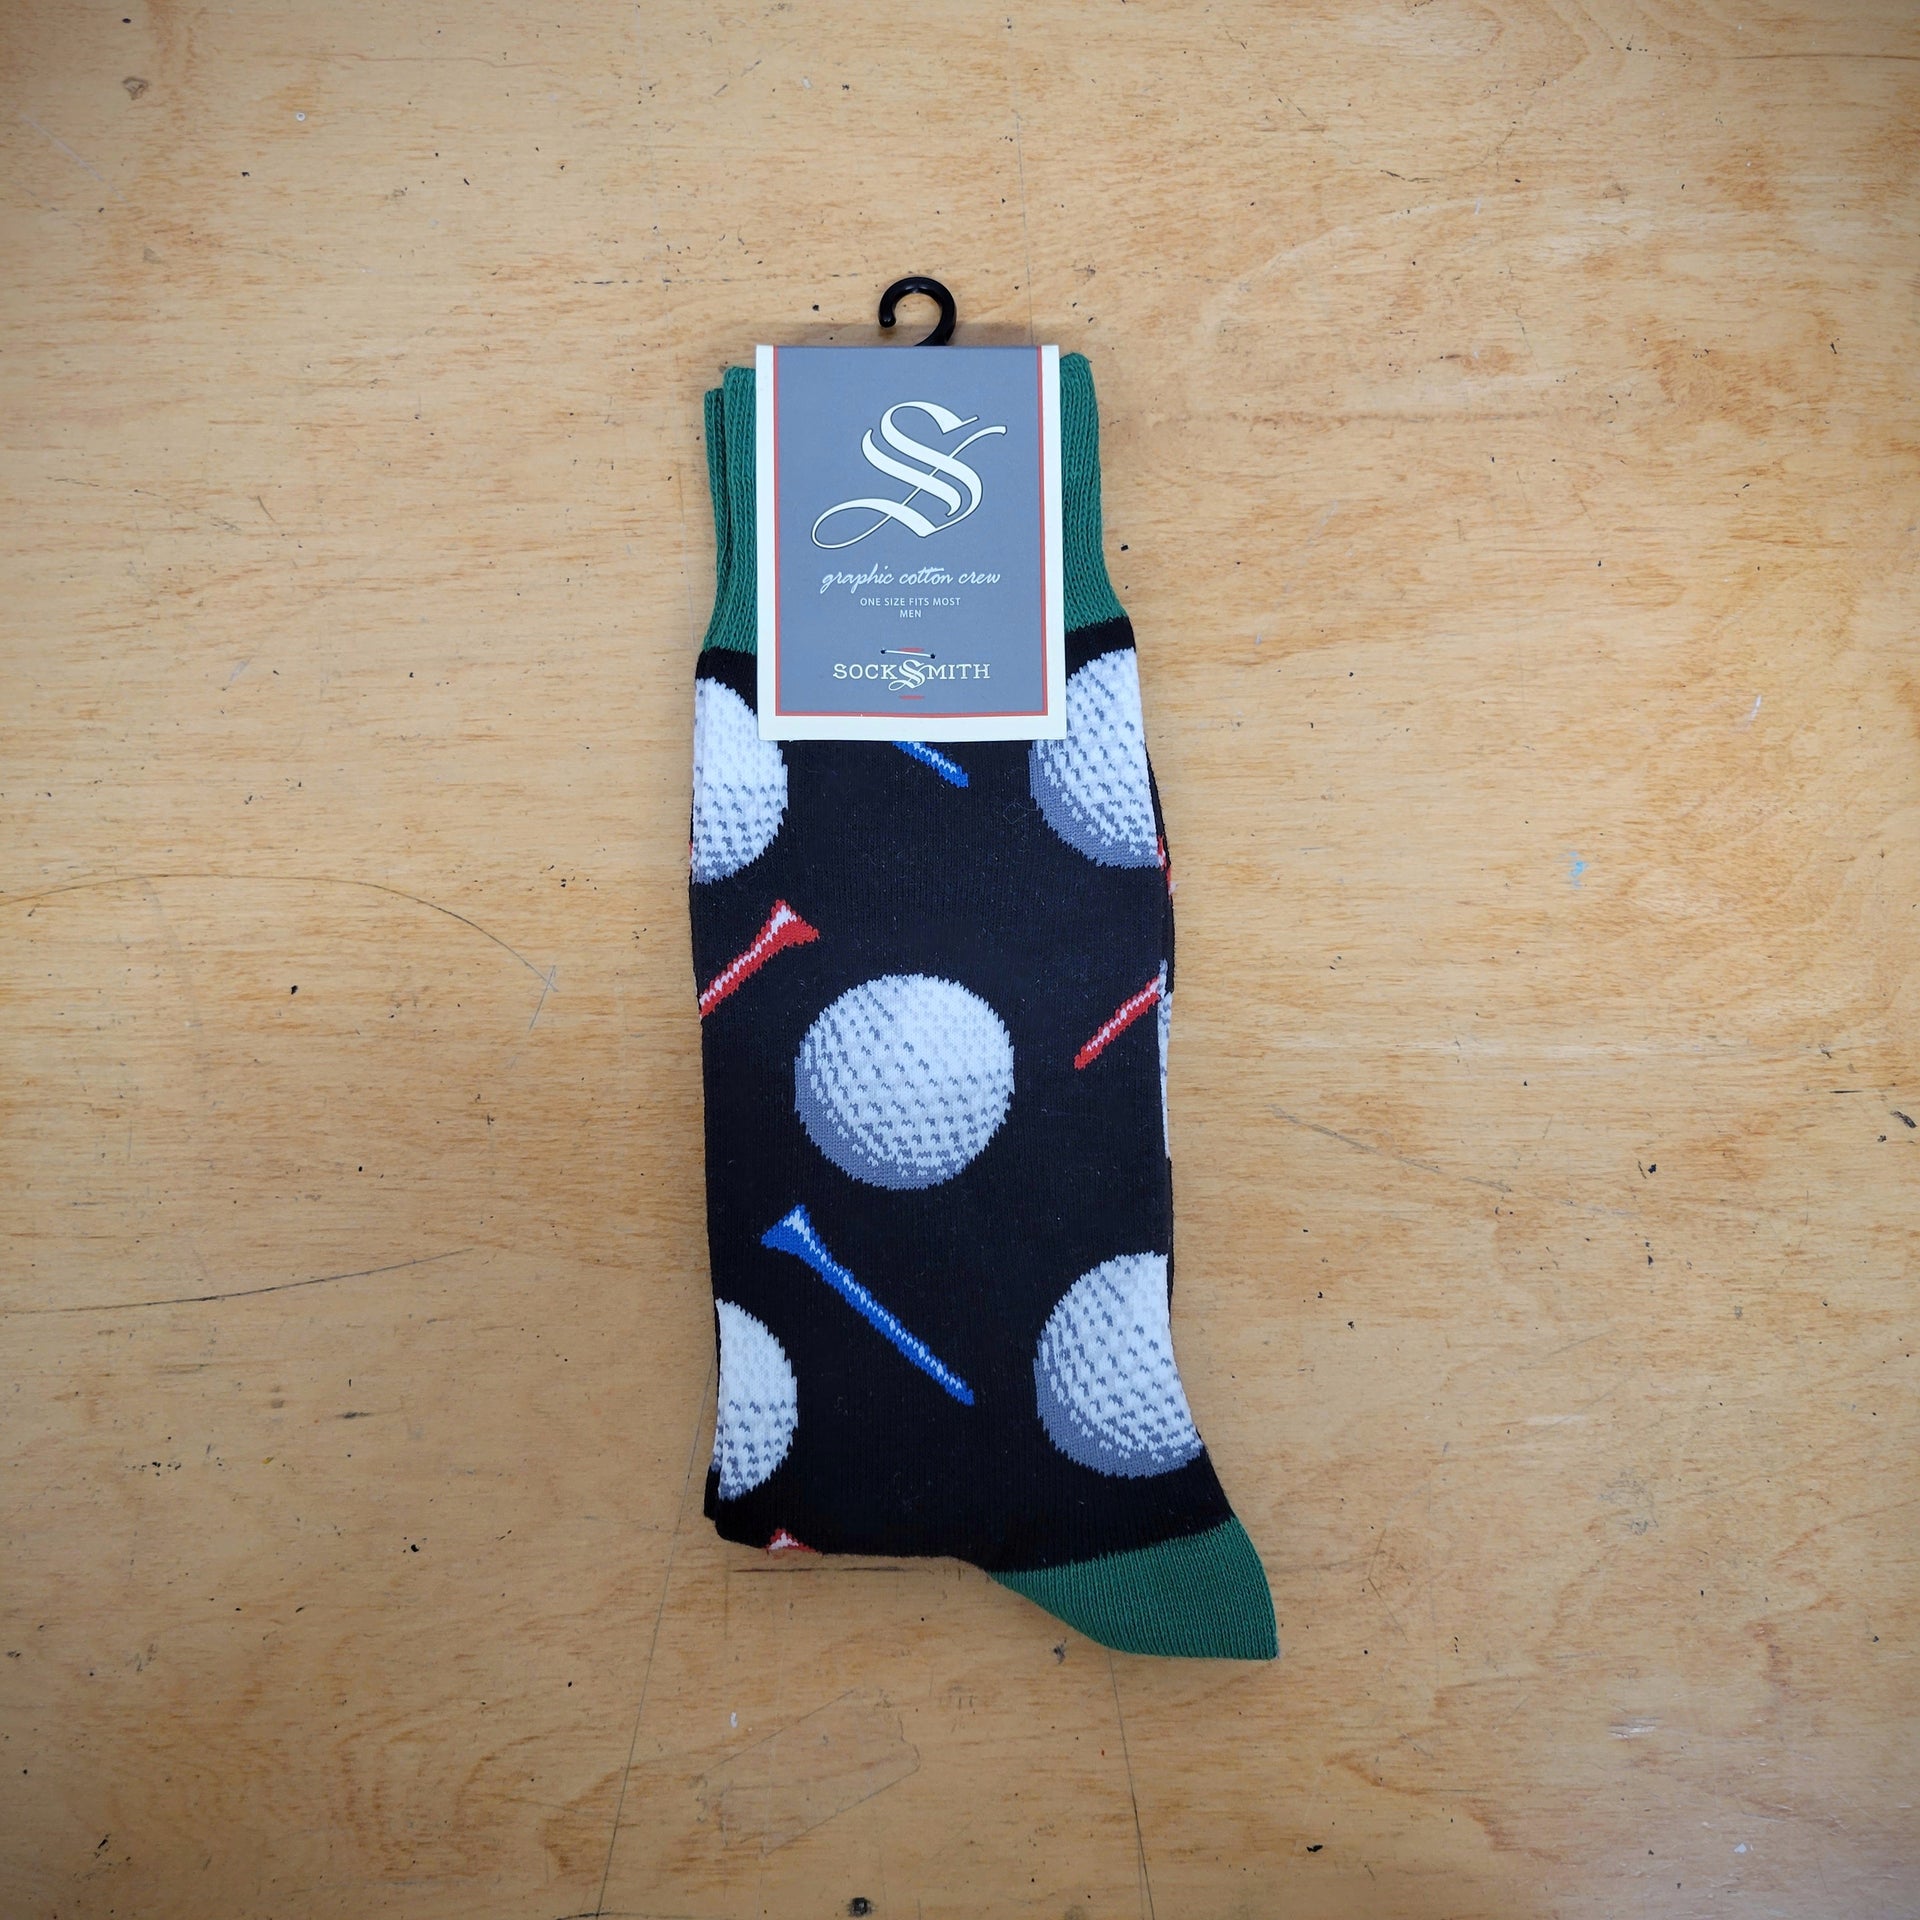 A pair of black socks with golf balls on them.